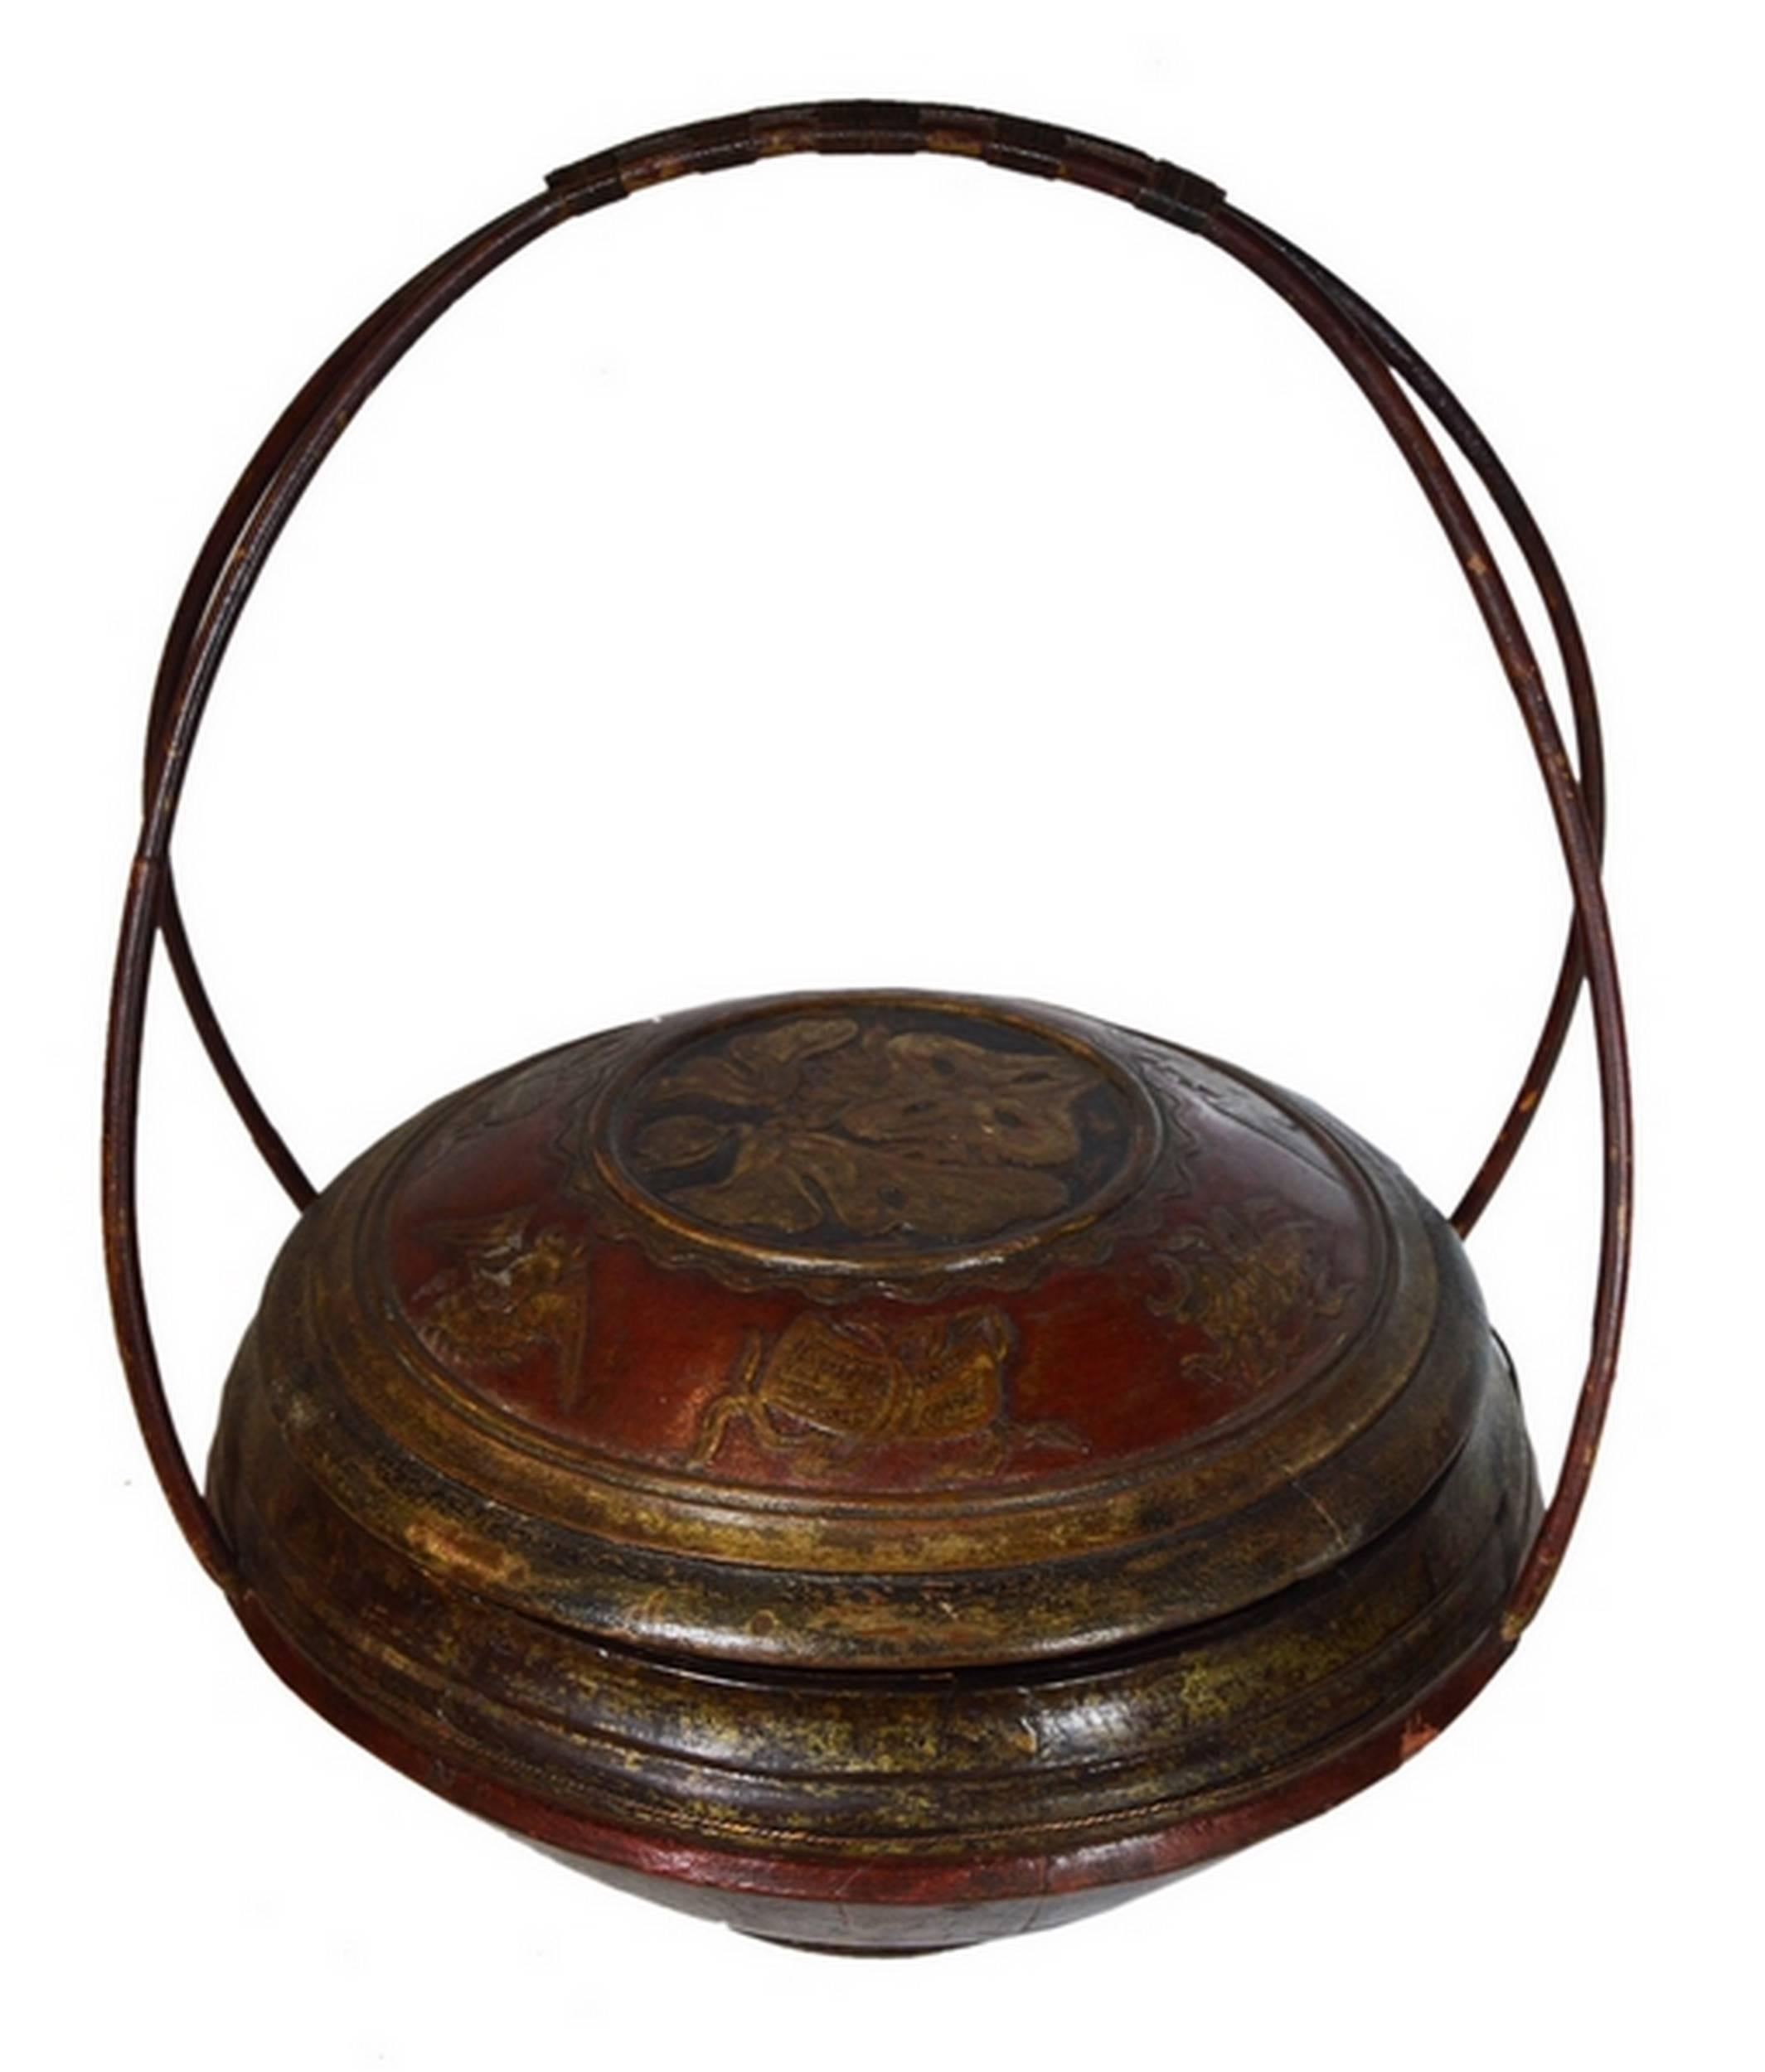 A 19th century Chinese carved wooden grain basket with large handles made of bamboo. This basket is made of a large bowl closed by a lid. The entire varnished basket is carved of wood and painted in red with touches of black. The lid showcases